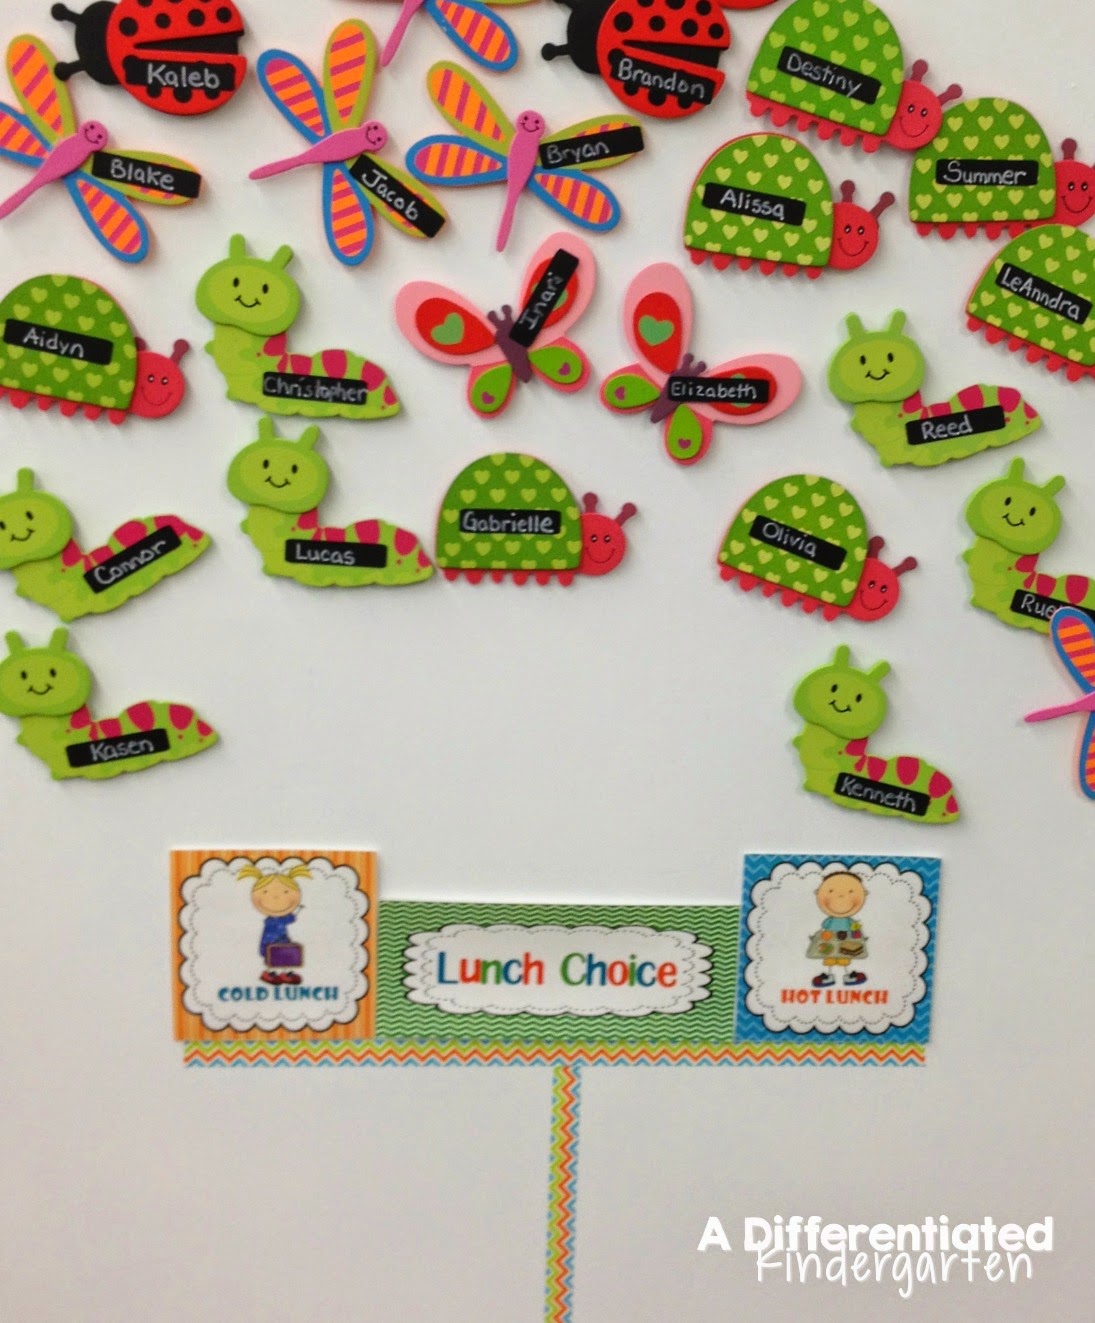 This blog post has daily schedules for a kindergarten classroom